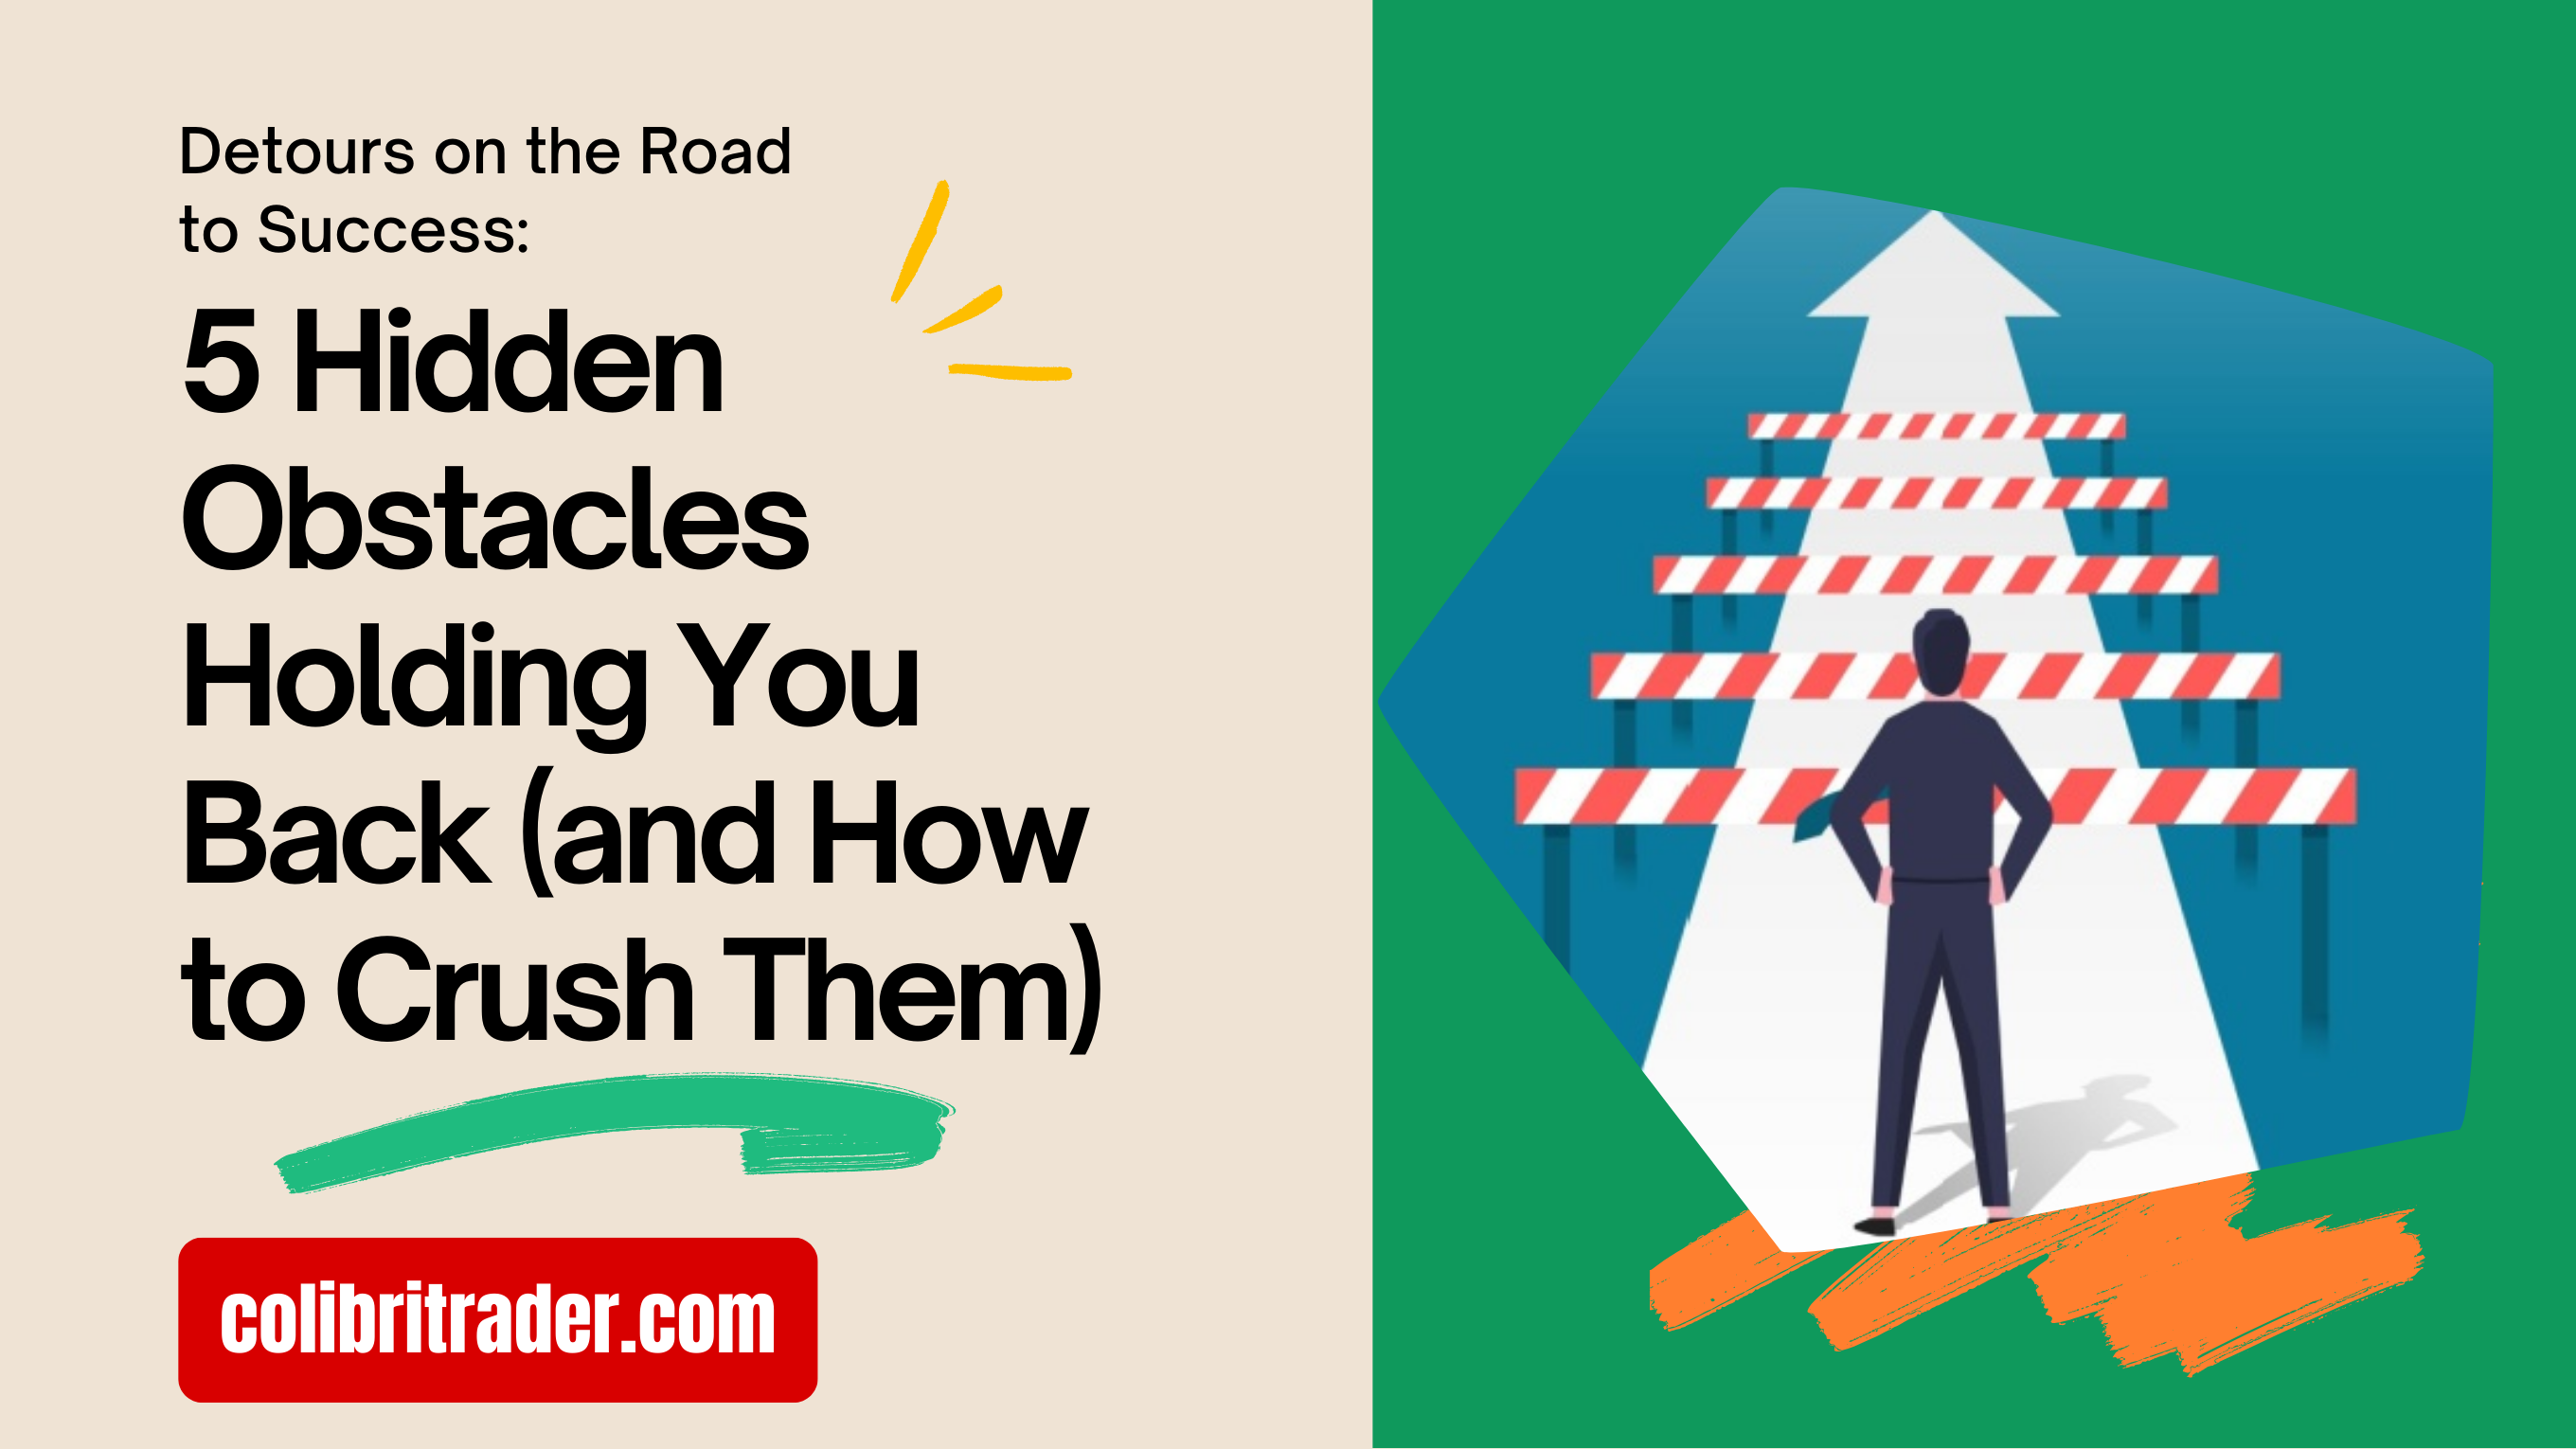 Detours on the Road to Success: 5 Hidden Obstacles Holding You Back (and How to Crush Them)